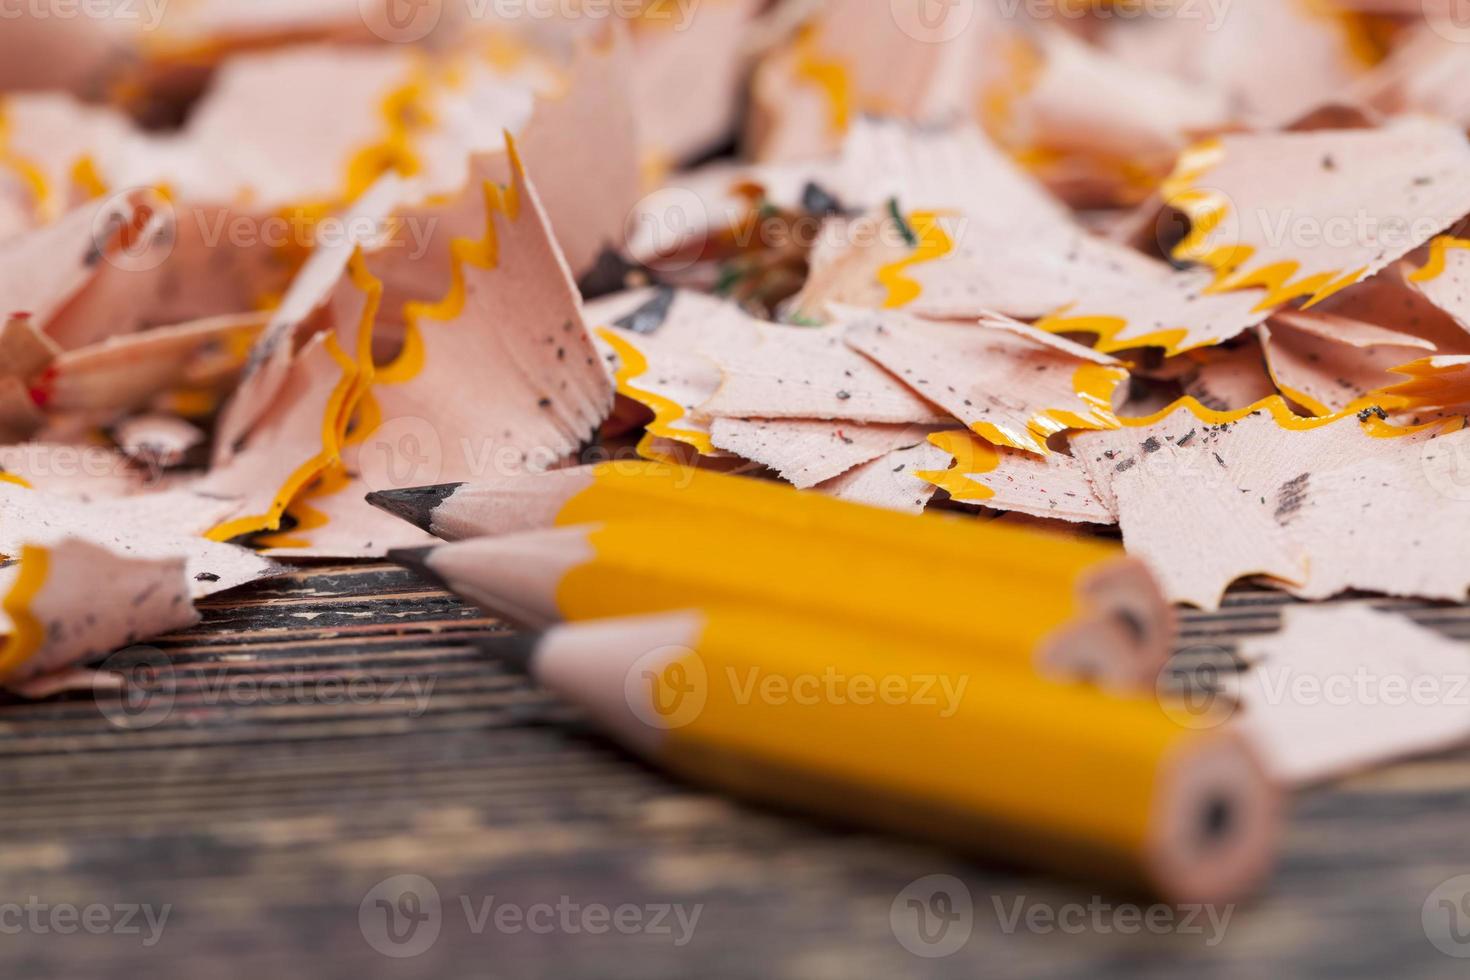 pencil shavings after sharpening photo